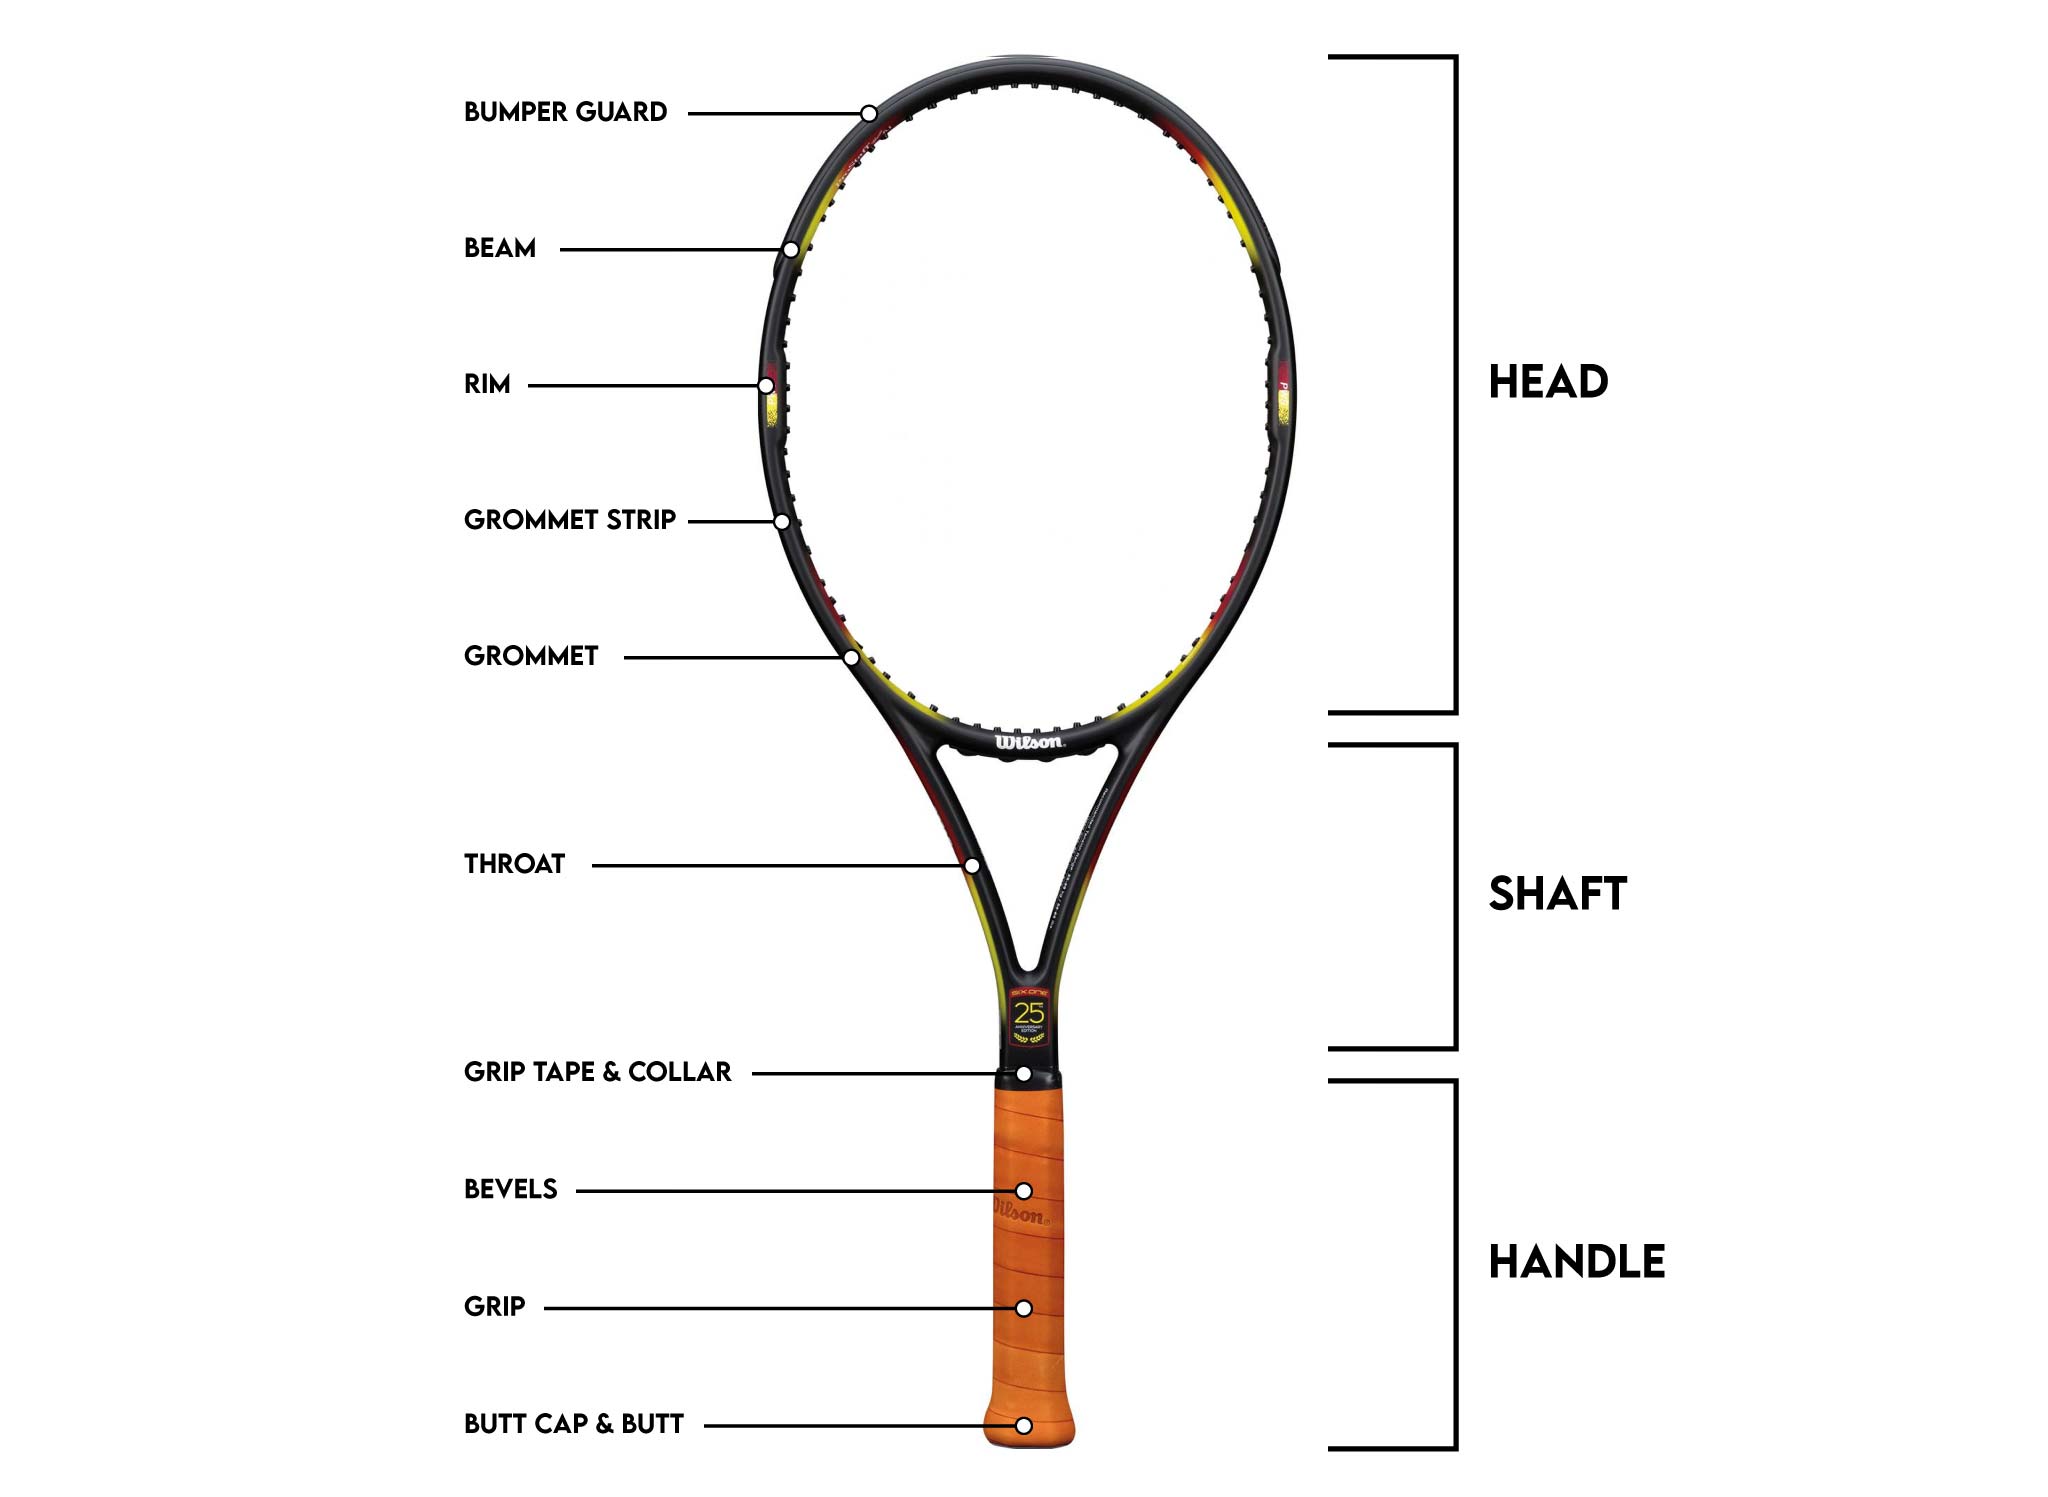 The Key Components & Parts of a Tennis Racket - Tennis Creative